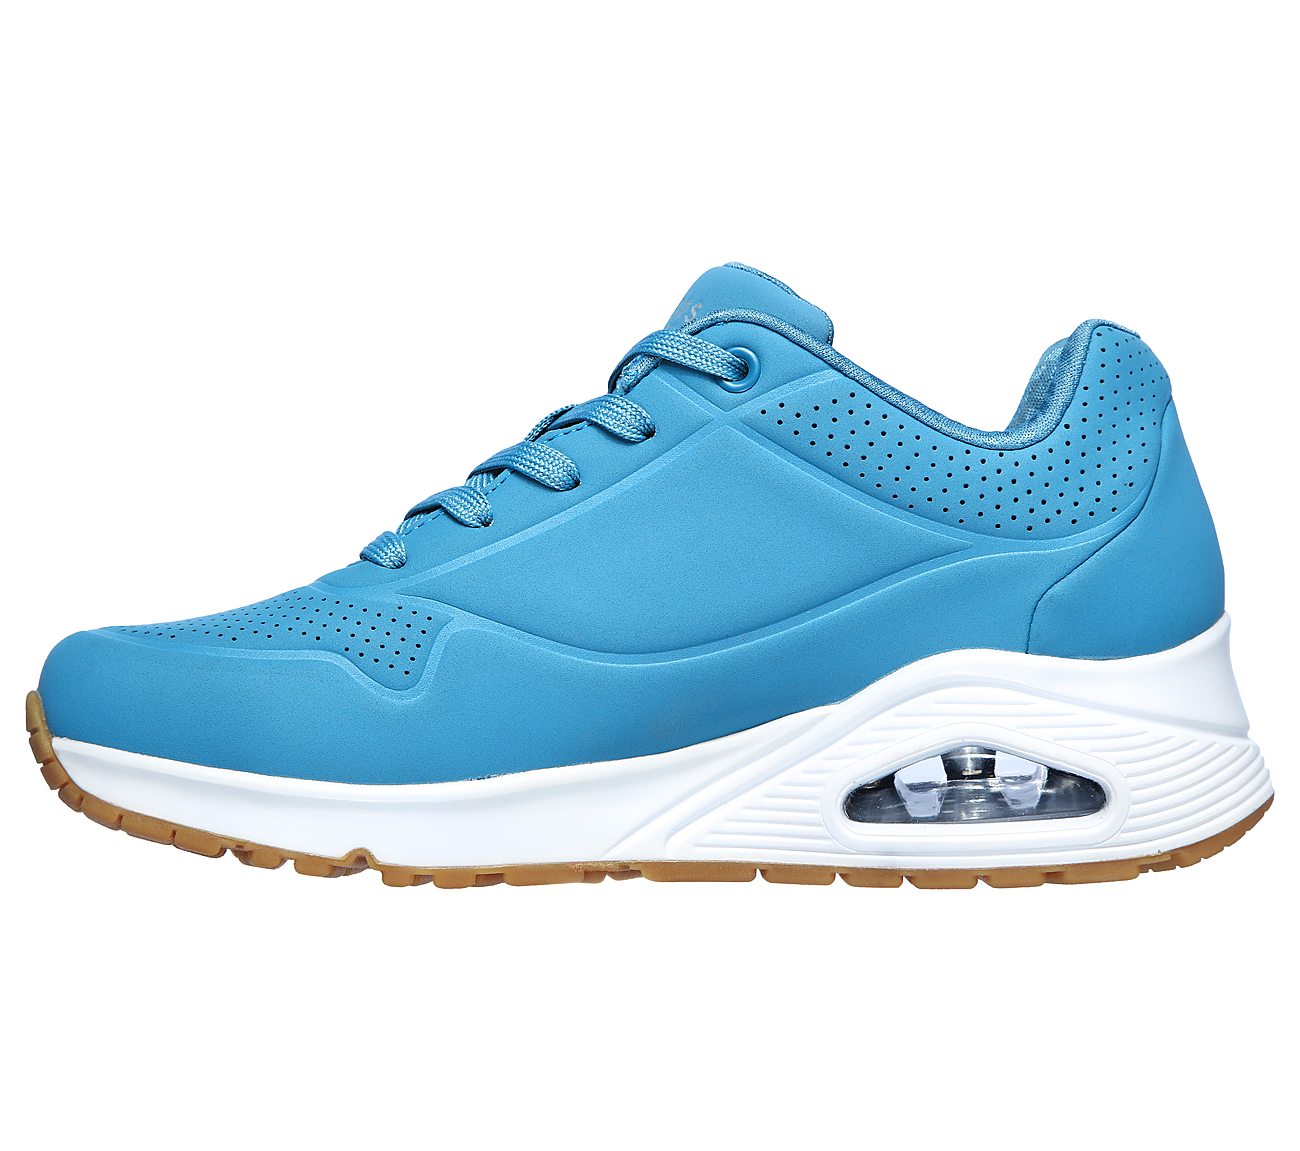 SKECHERS - SKECHERS Uno - Layover : Set the tone to styled comfort wearing  Skechers Street Uno - Layover. This fashion lace-up features a leather and  synthetic upper with an athletic mesh